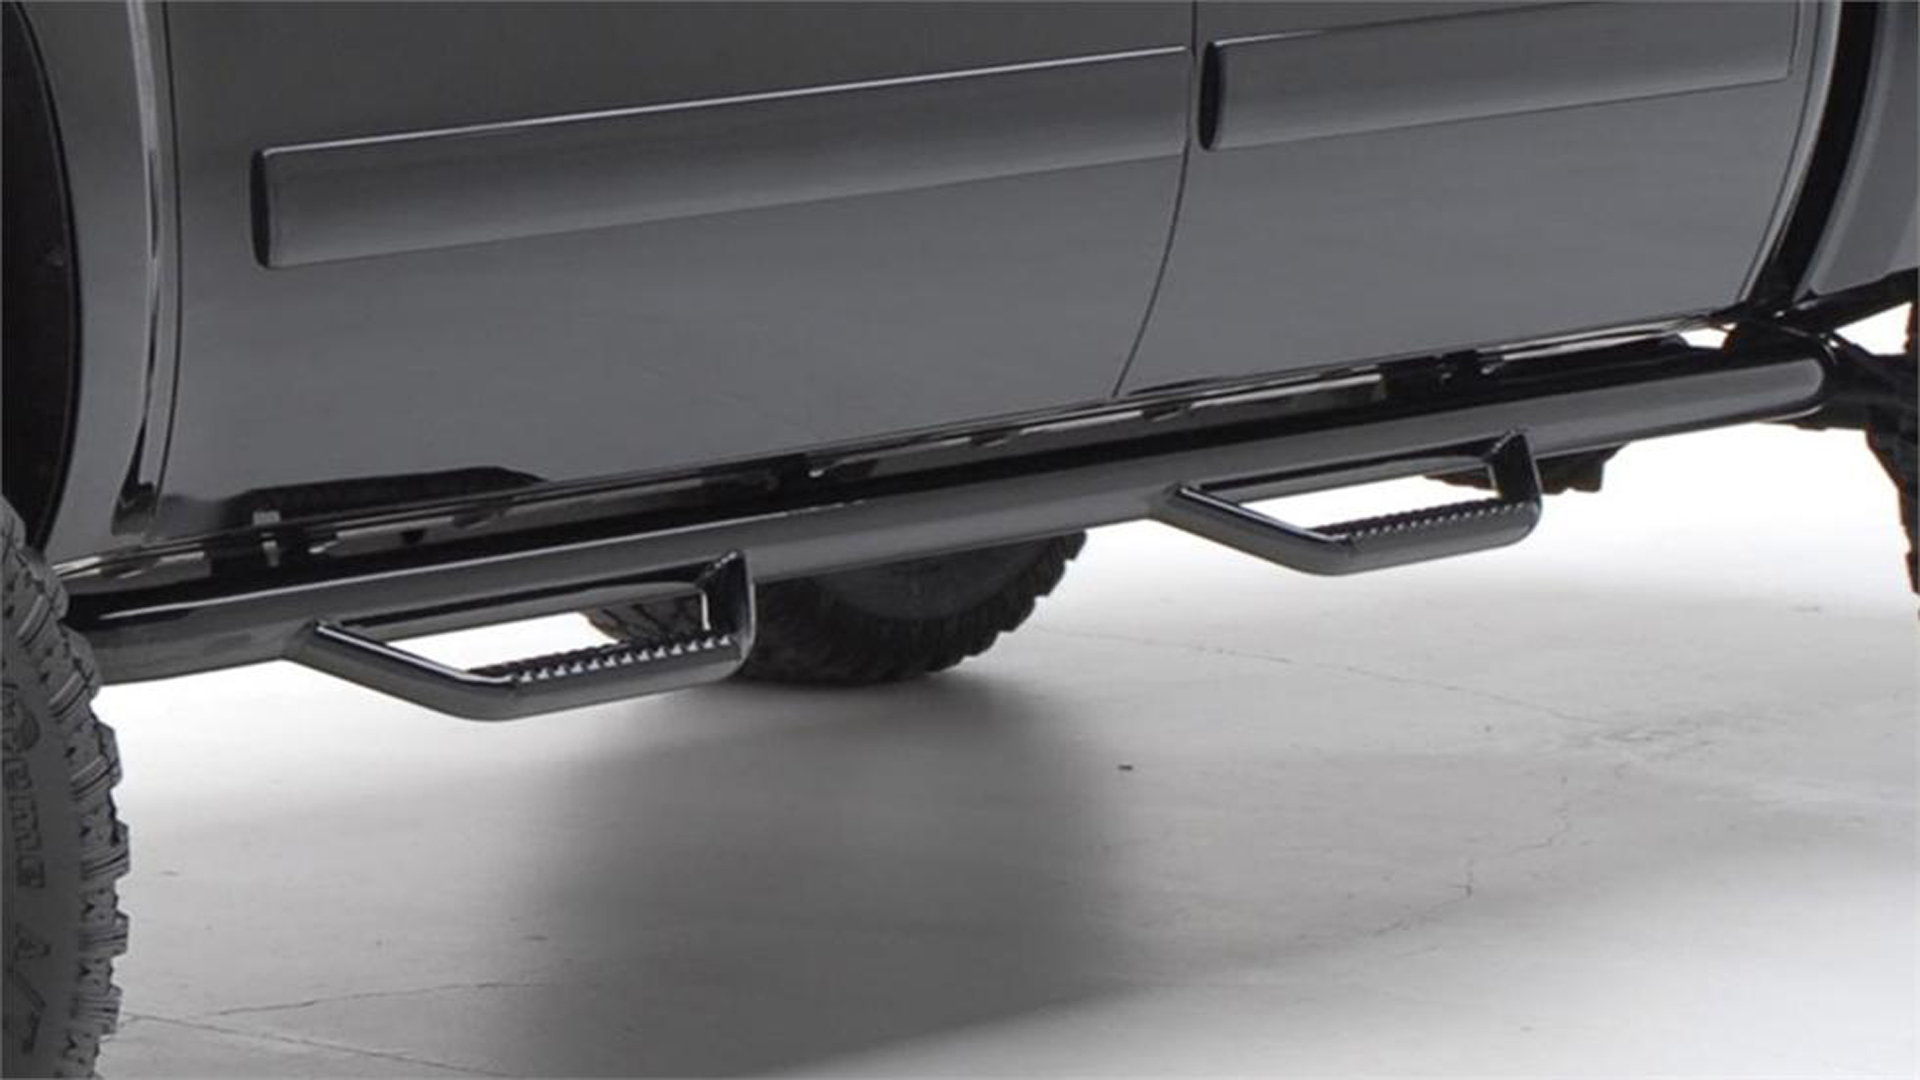 FOR 09-14 FORD F150 EXT/SUPER CAB 5" BLACK OVAL SIDE STEP NERF BAR RUNNING BOARD 